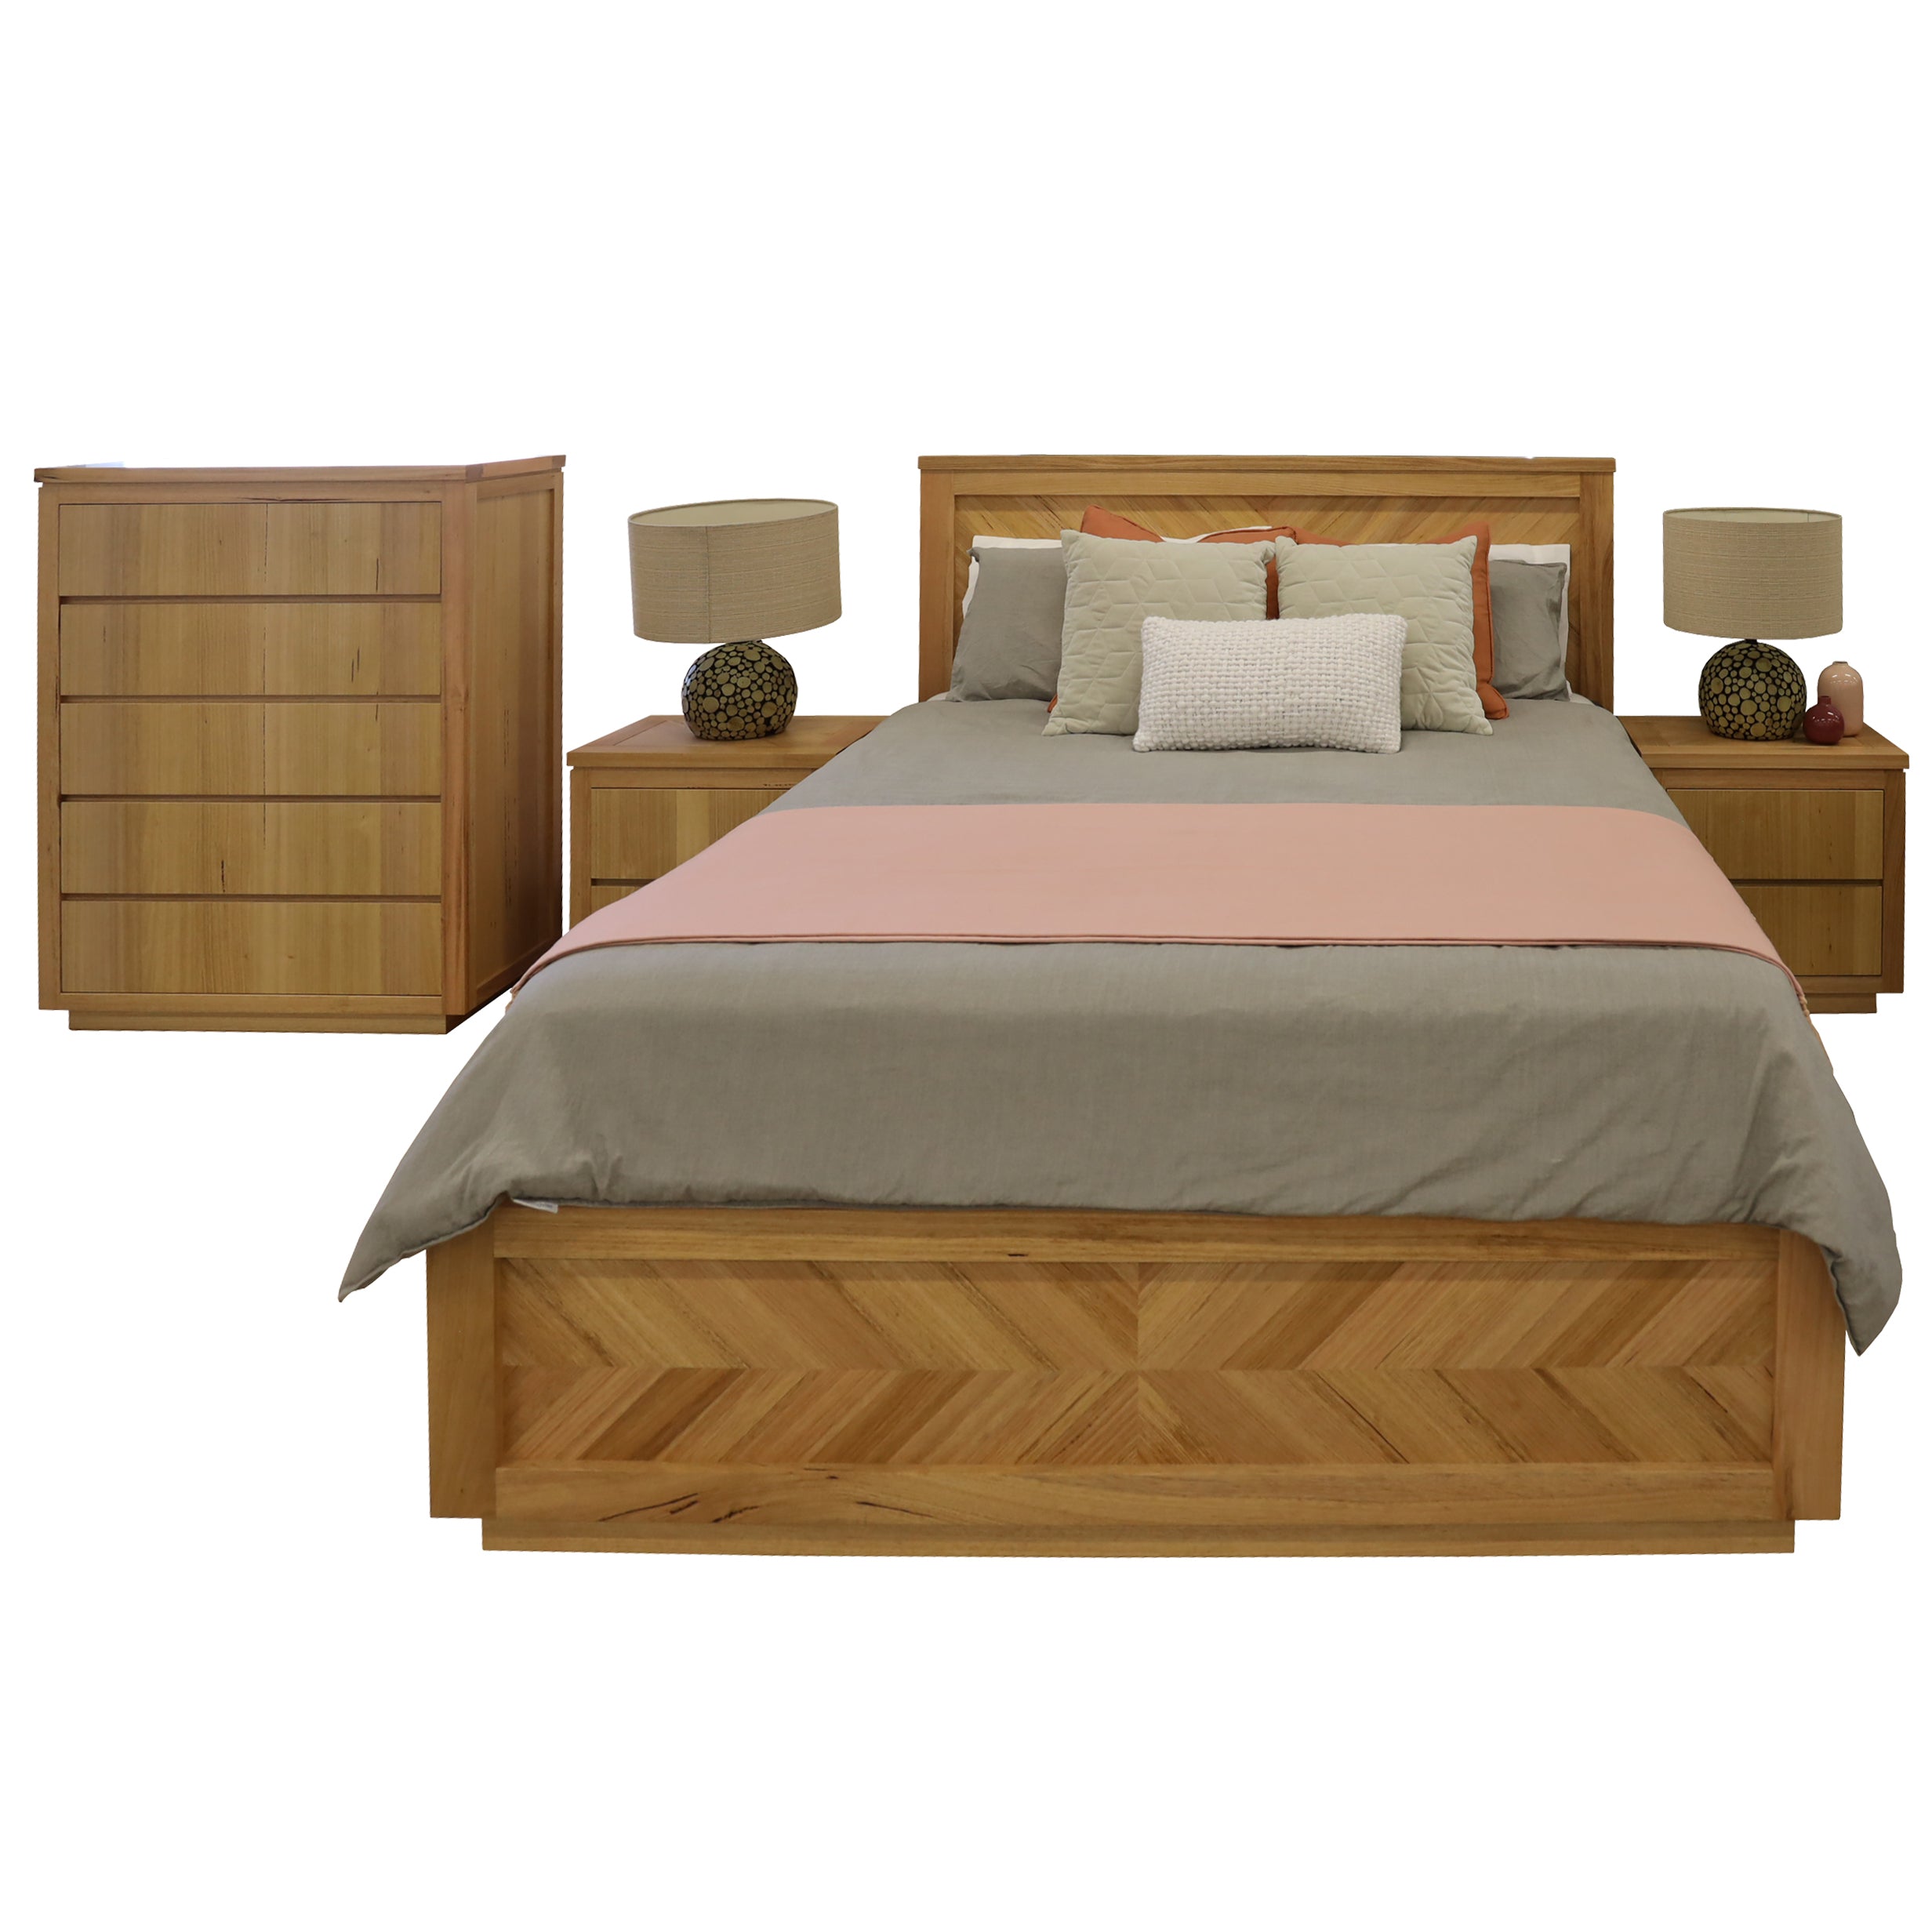 Queen Size Premium Luxury Bedroom Package 4pc Bed Frame, Bedside Tables and Tallboy